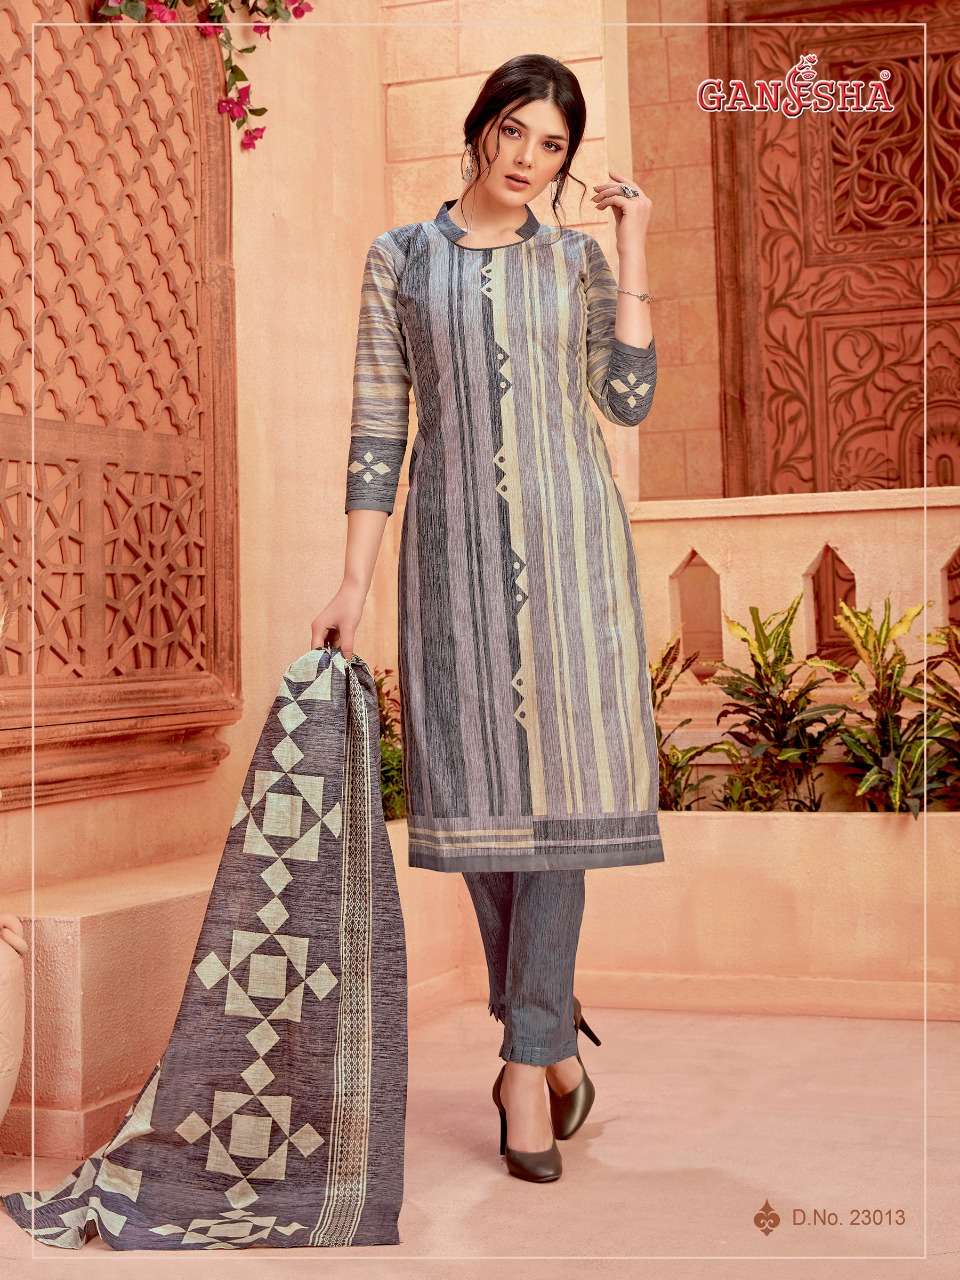 GANESHA VOL-23 BY GANESHA 23004 TO 23015 SERIES BEAUTIFUL SUITS COLORFUL STYLISH FANCY CASUAL WEAR & ETHNIC WEAR PURE COTTON PRINTED DRESSES AT WHOLESALE PRICE